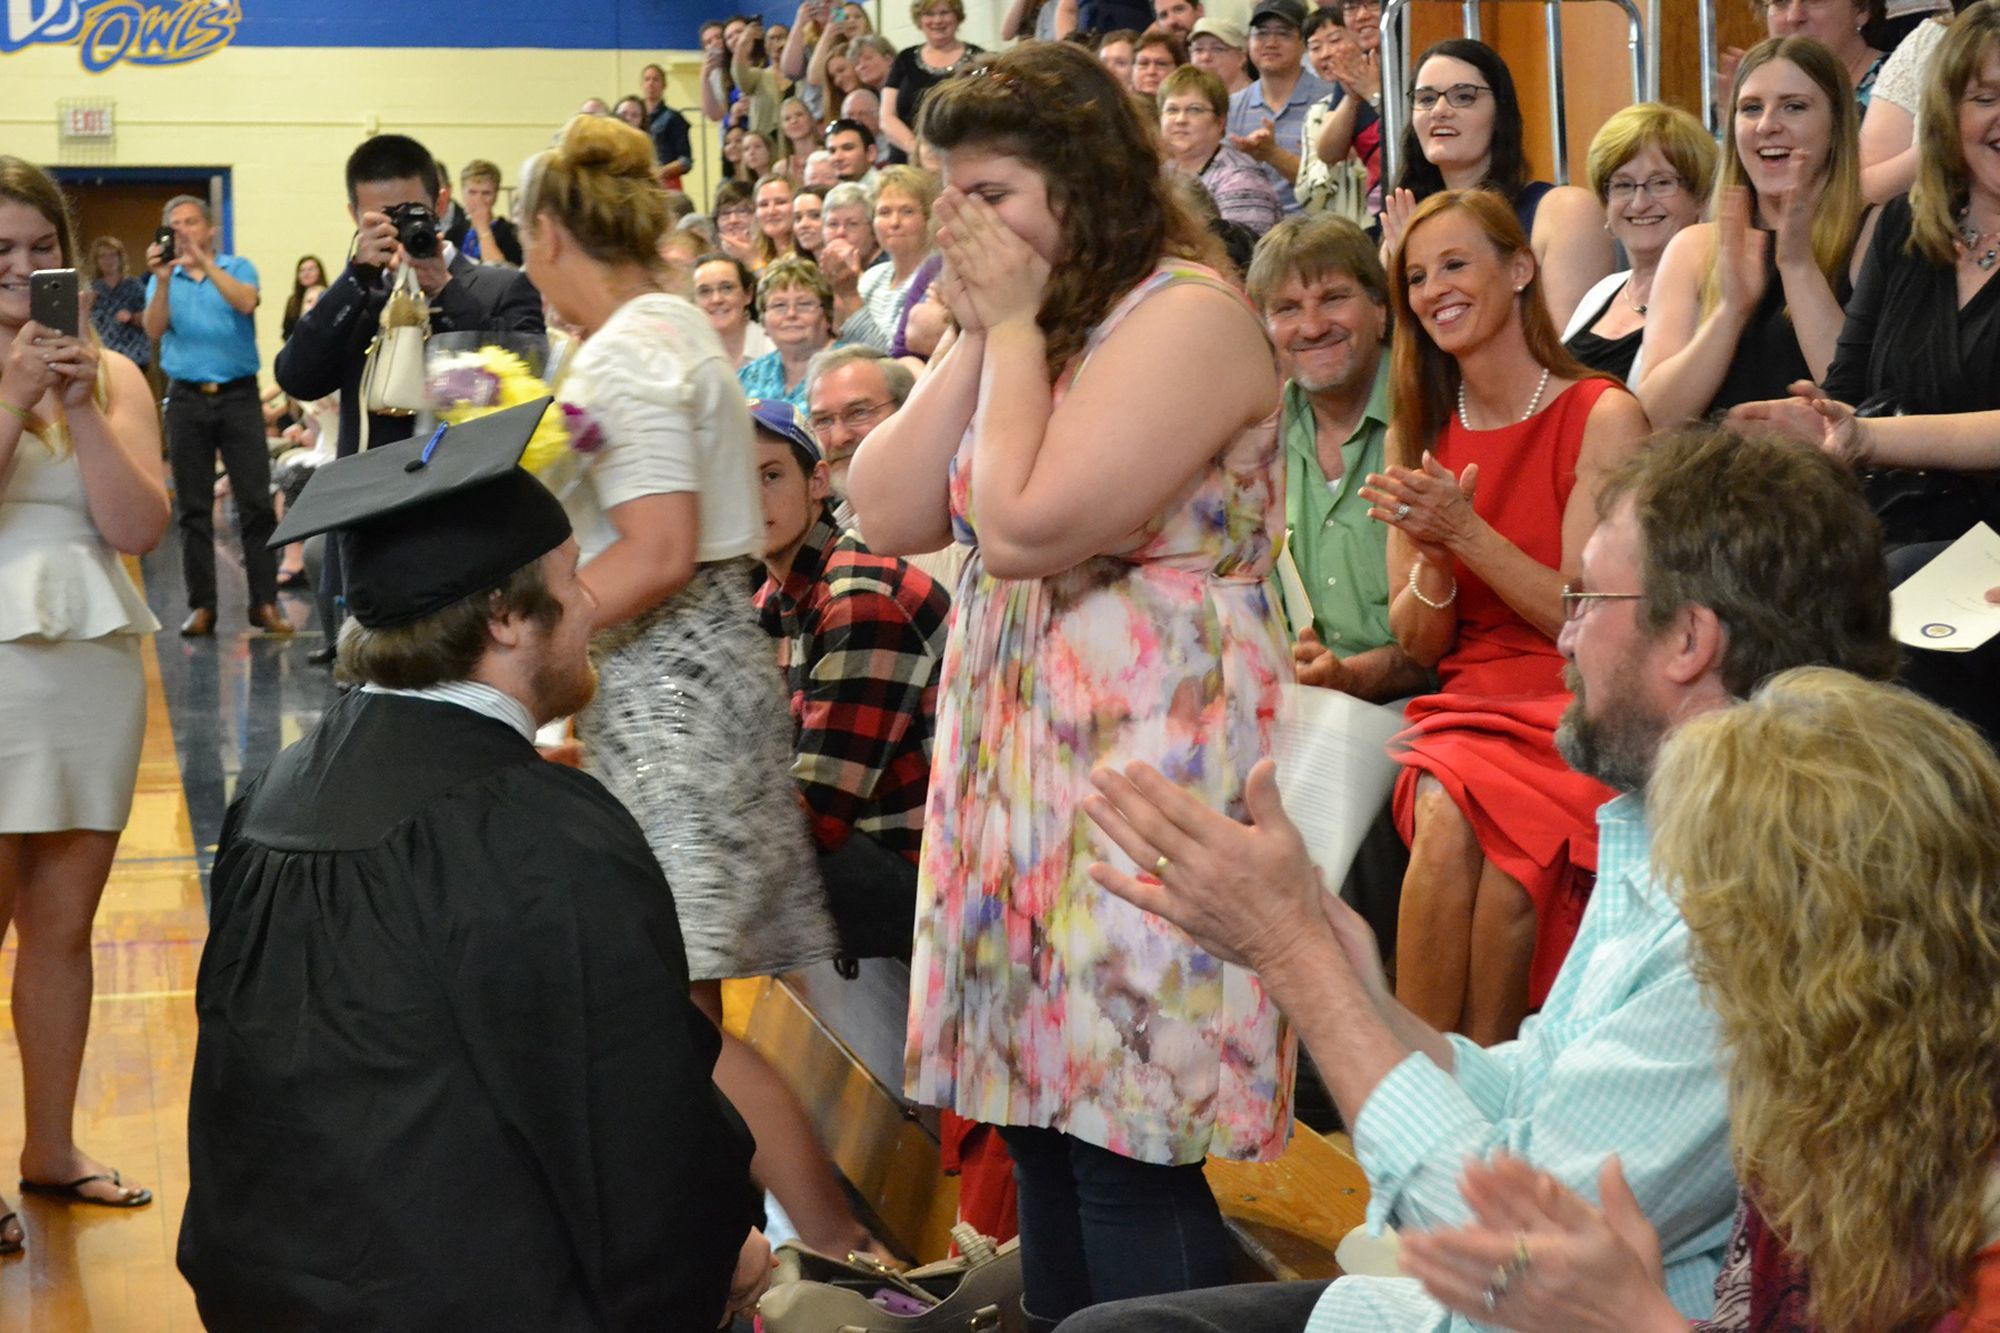 University of Maine at Presque Isle’s Timothy Babine proposes to his girlfirend, Hayley Hamilton, during commencement exercises at the school on Saturday.